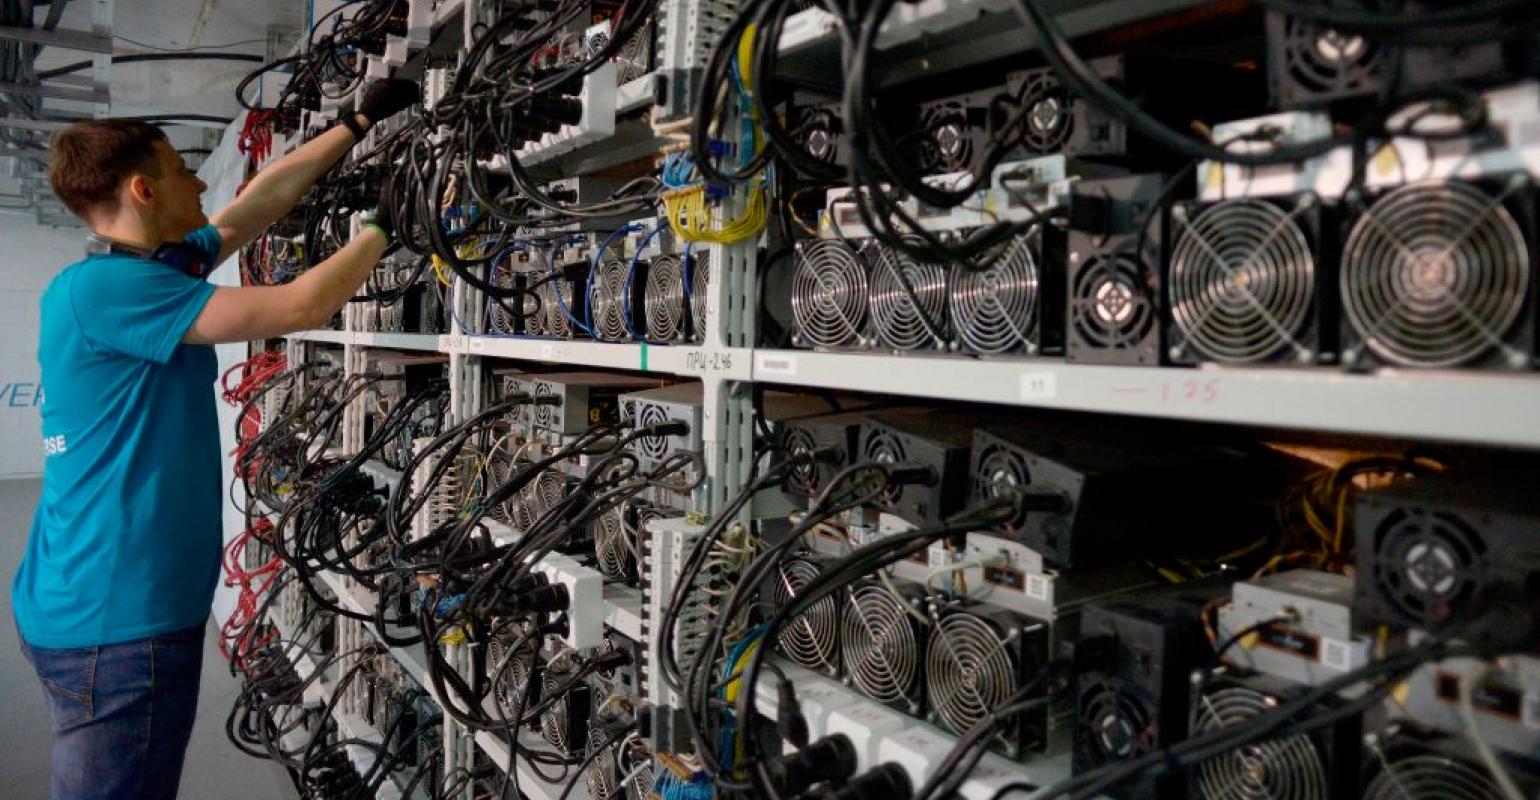 Cryptocurrency data centers 0.0201120 ethereum